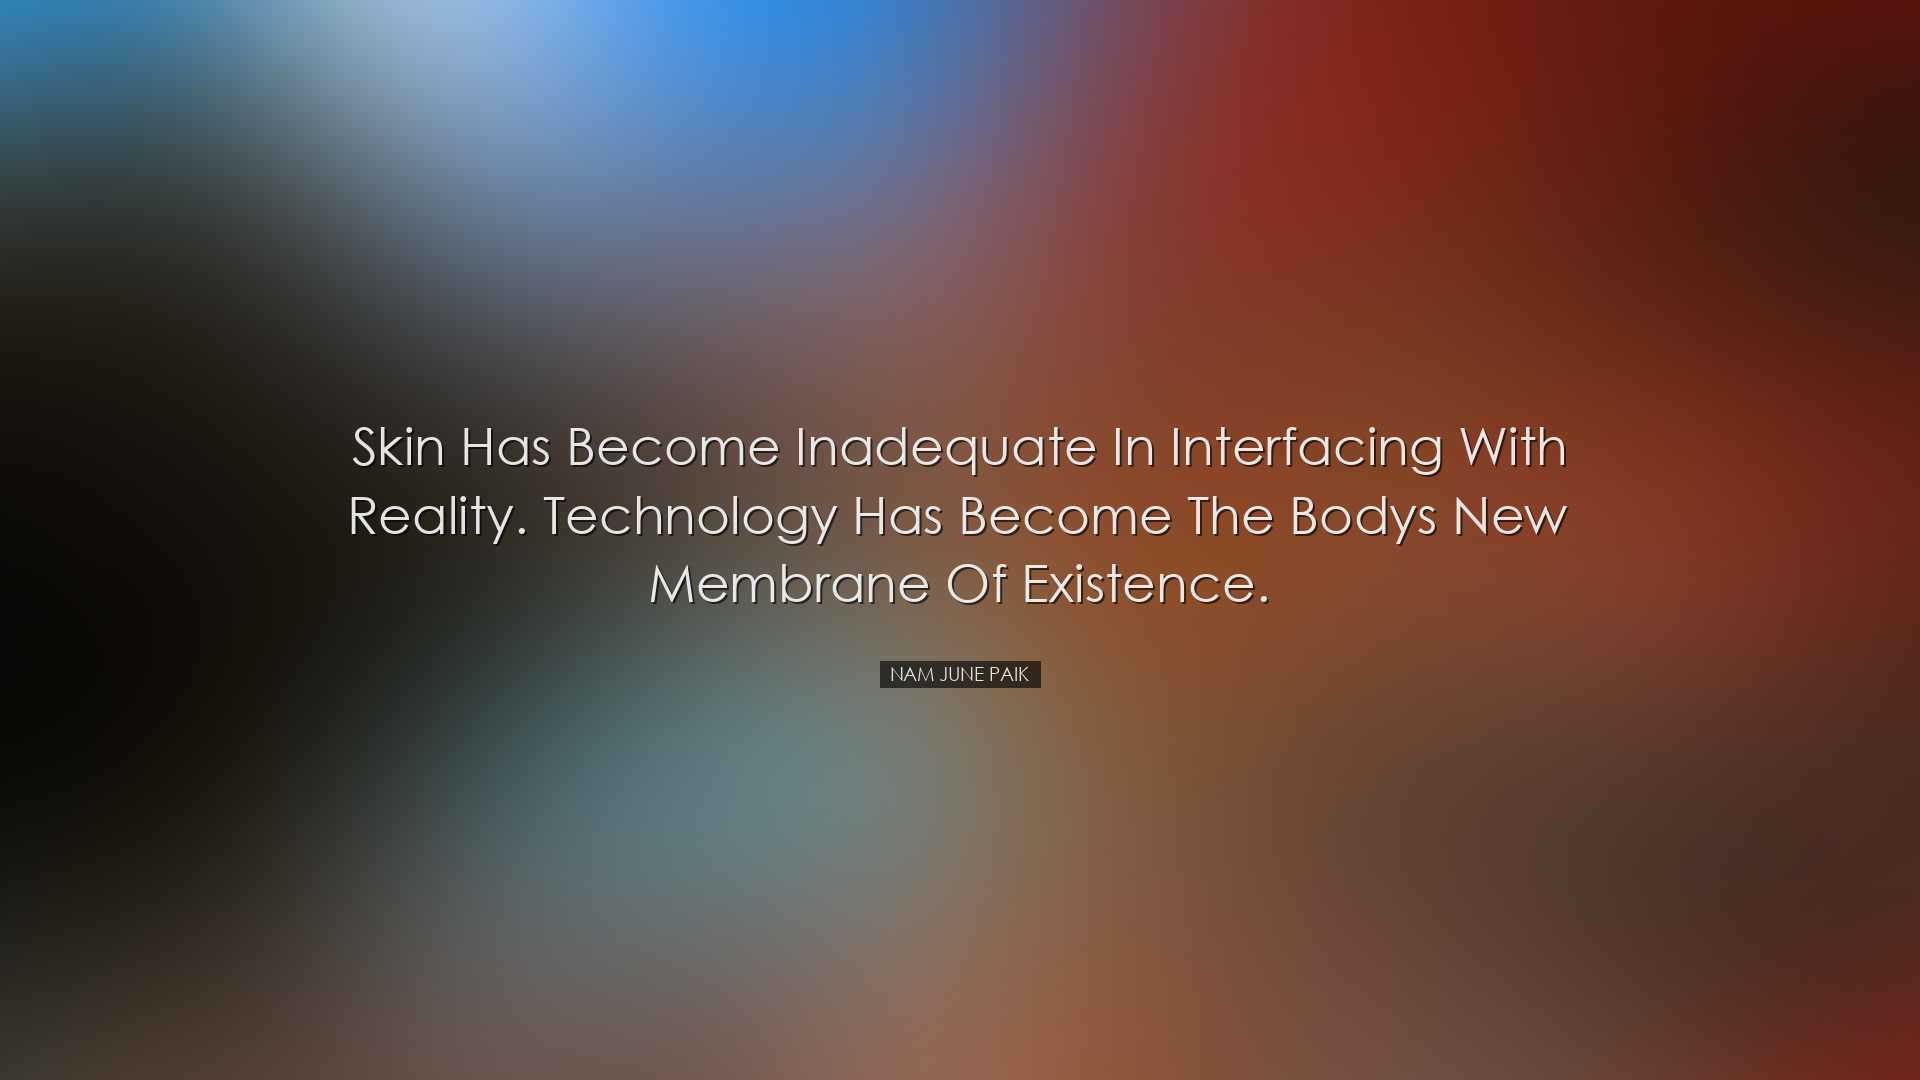 Skin has become inadequate in interfacing with reality. Technology